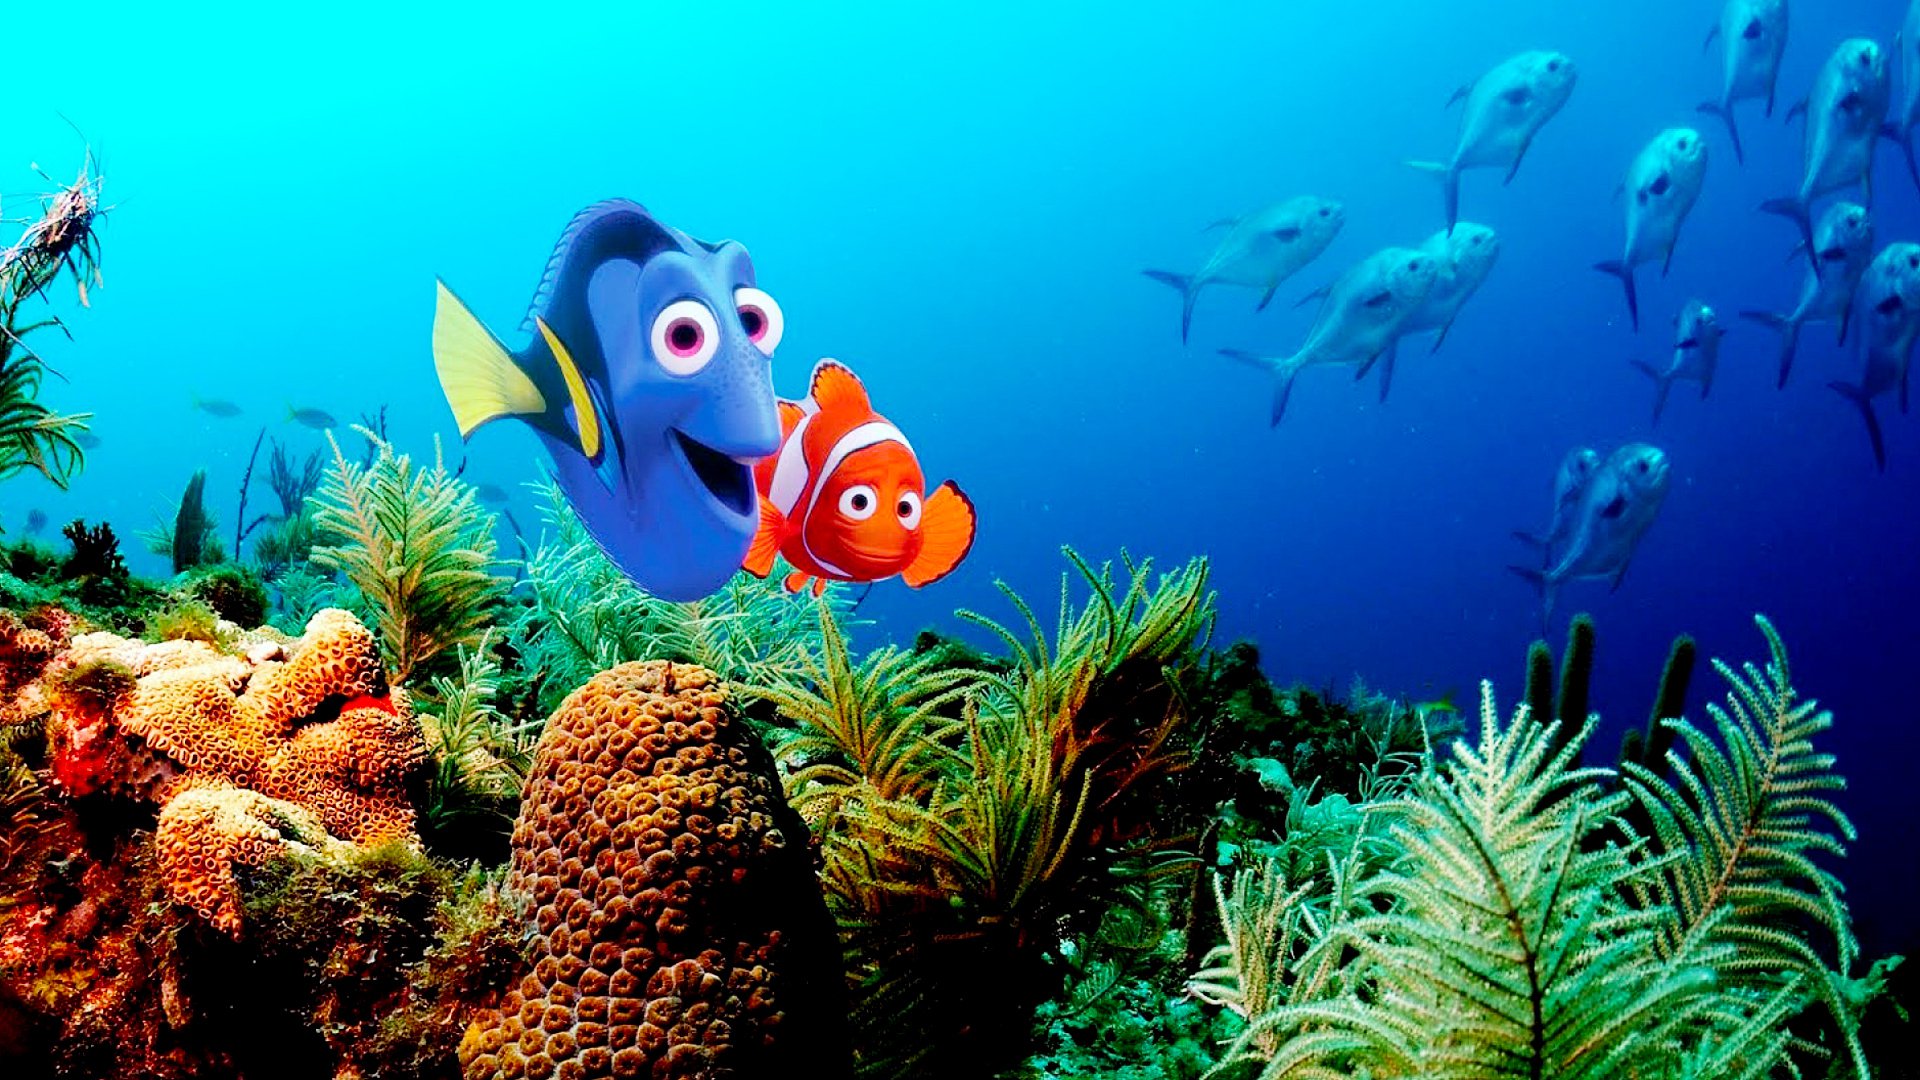 Finding Nemo: The Continuing Adventures